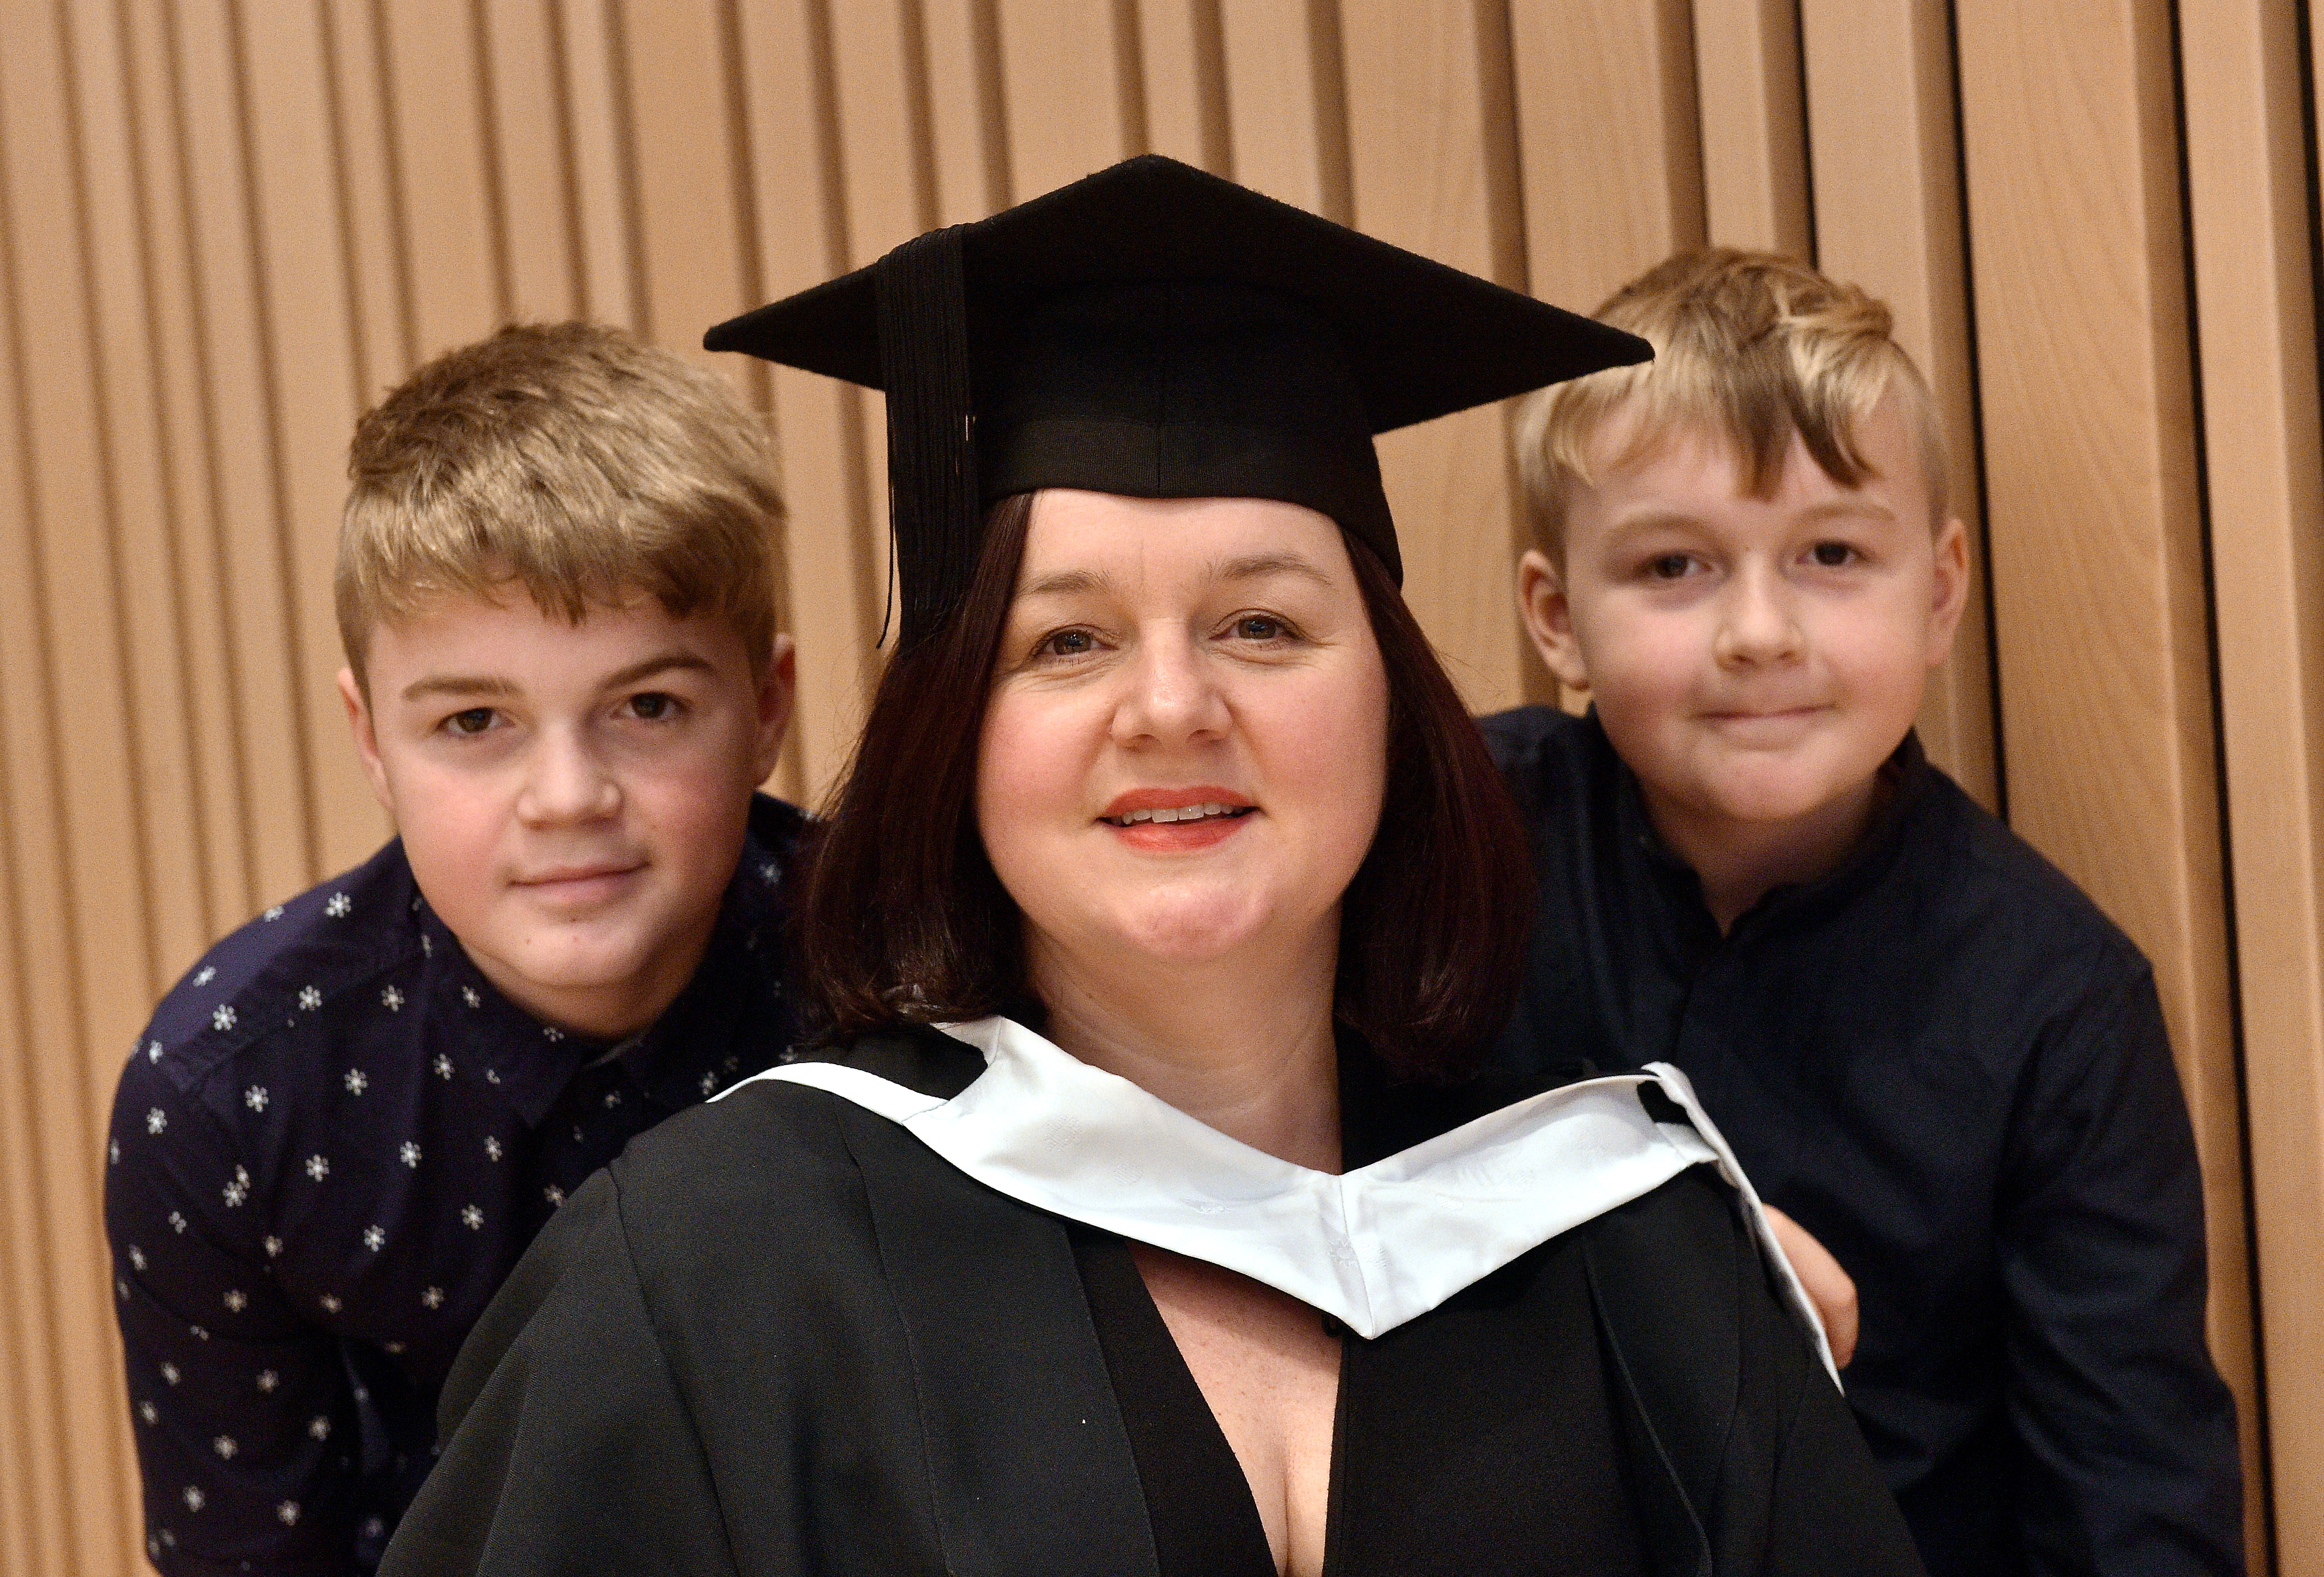 RGU Winter Graduations at Music Hall, Aberdeen
Pictured is Charlotte McLean with her sons from left Callum, 14 and Ioan, 10 (Corr). MSc Data Science An Aberdeen-based mature student has reignited her passion for data after heading back into education to complete a Masters Degree in Data Science at RGU. Charlotte McLean (45), who is originally from Cardiff, lost her job during the oil crash and found herself commuting to Edinburgh for a role which lasted over three years. She then made the choice to go back to university to give her the opportunity to enhance her skills with a view to gaining a role in the city she and her family had settled in. North-East 
Picture by DARRELL BENNS 
Pictured on 11/12/2019   
CR0014966